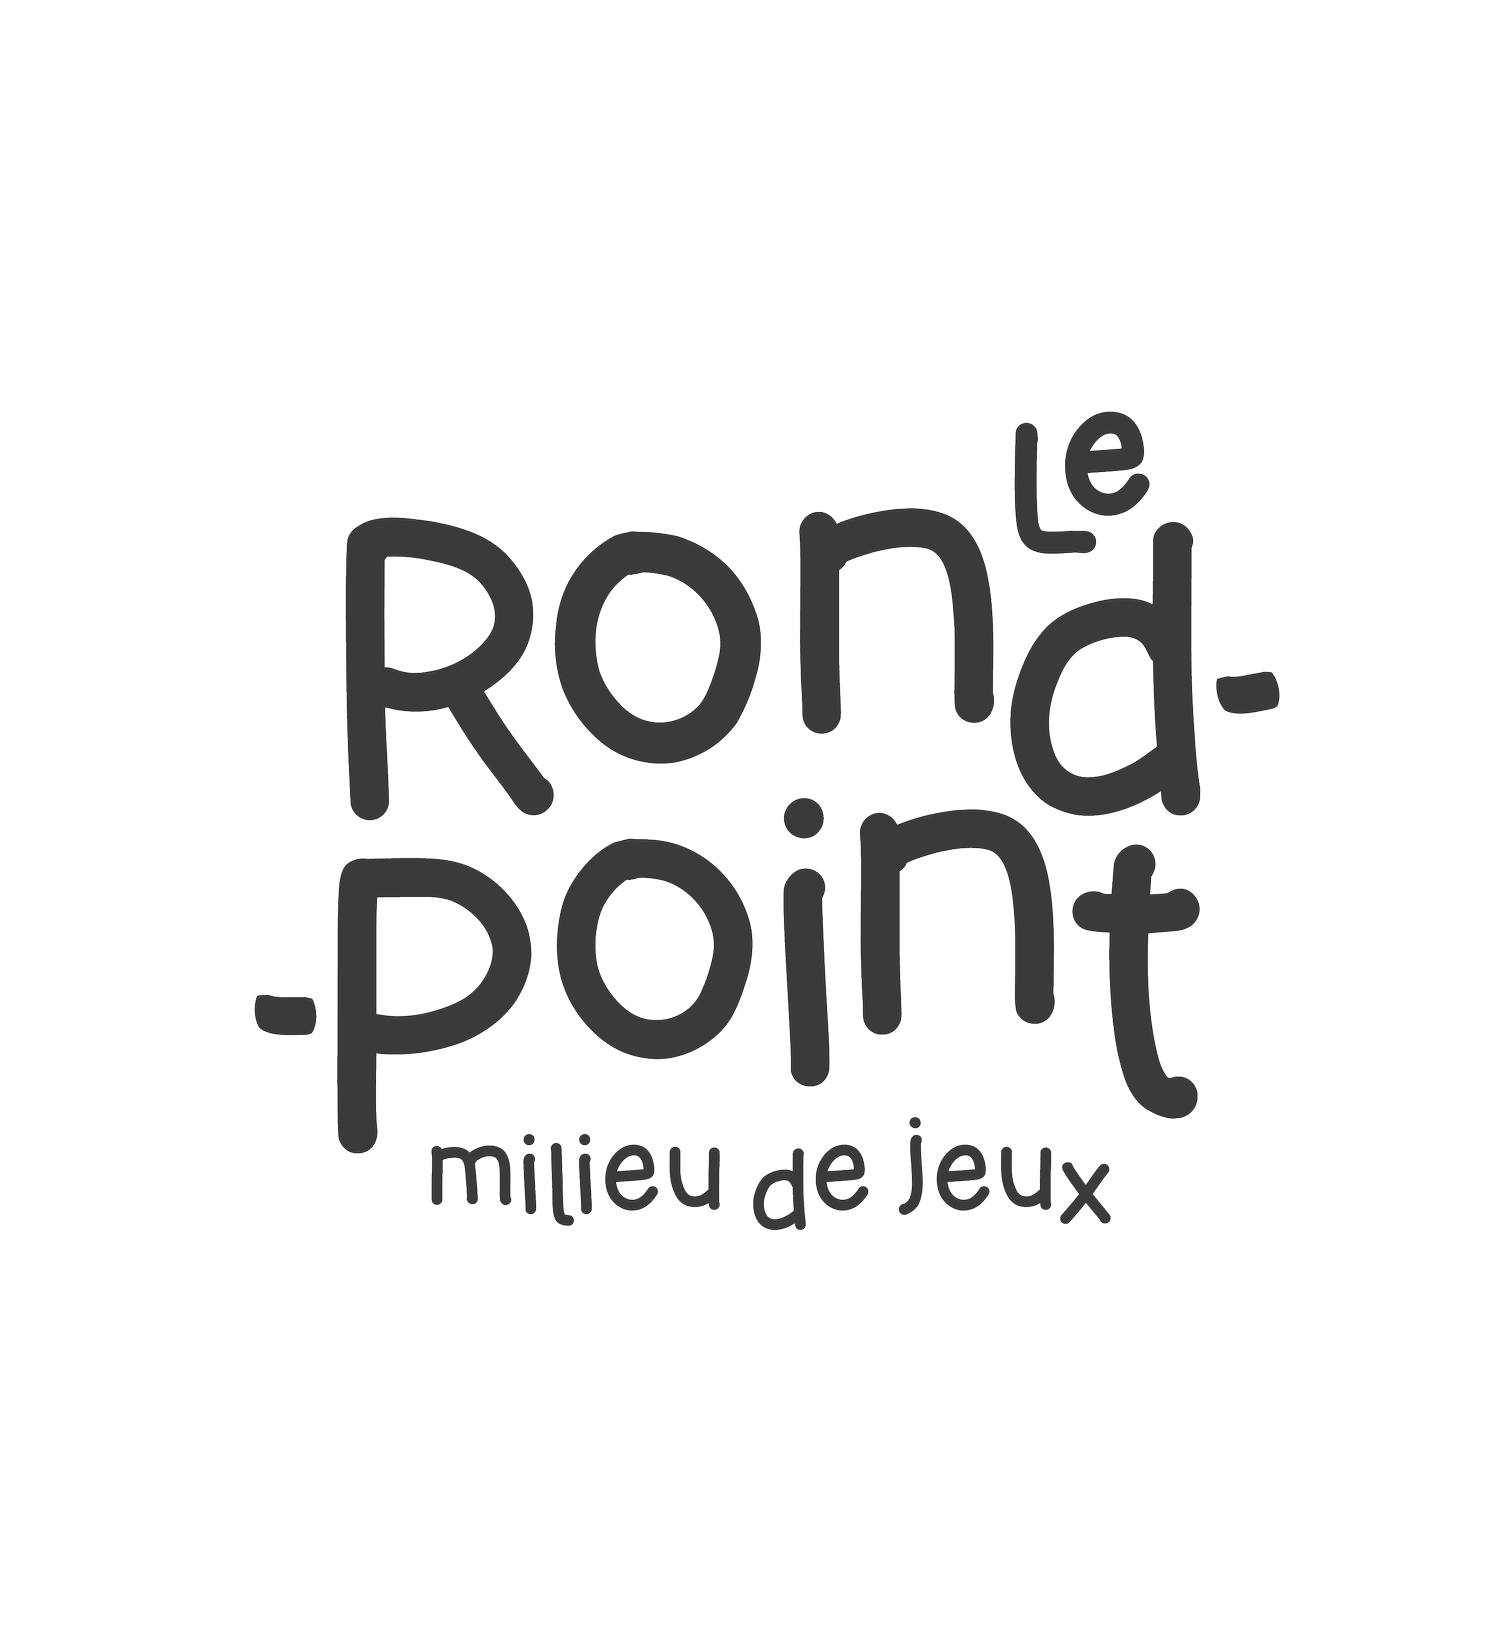 Le rond point